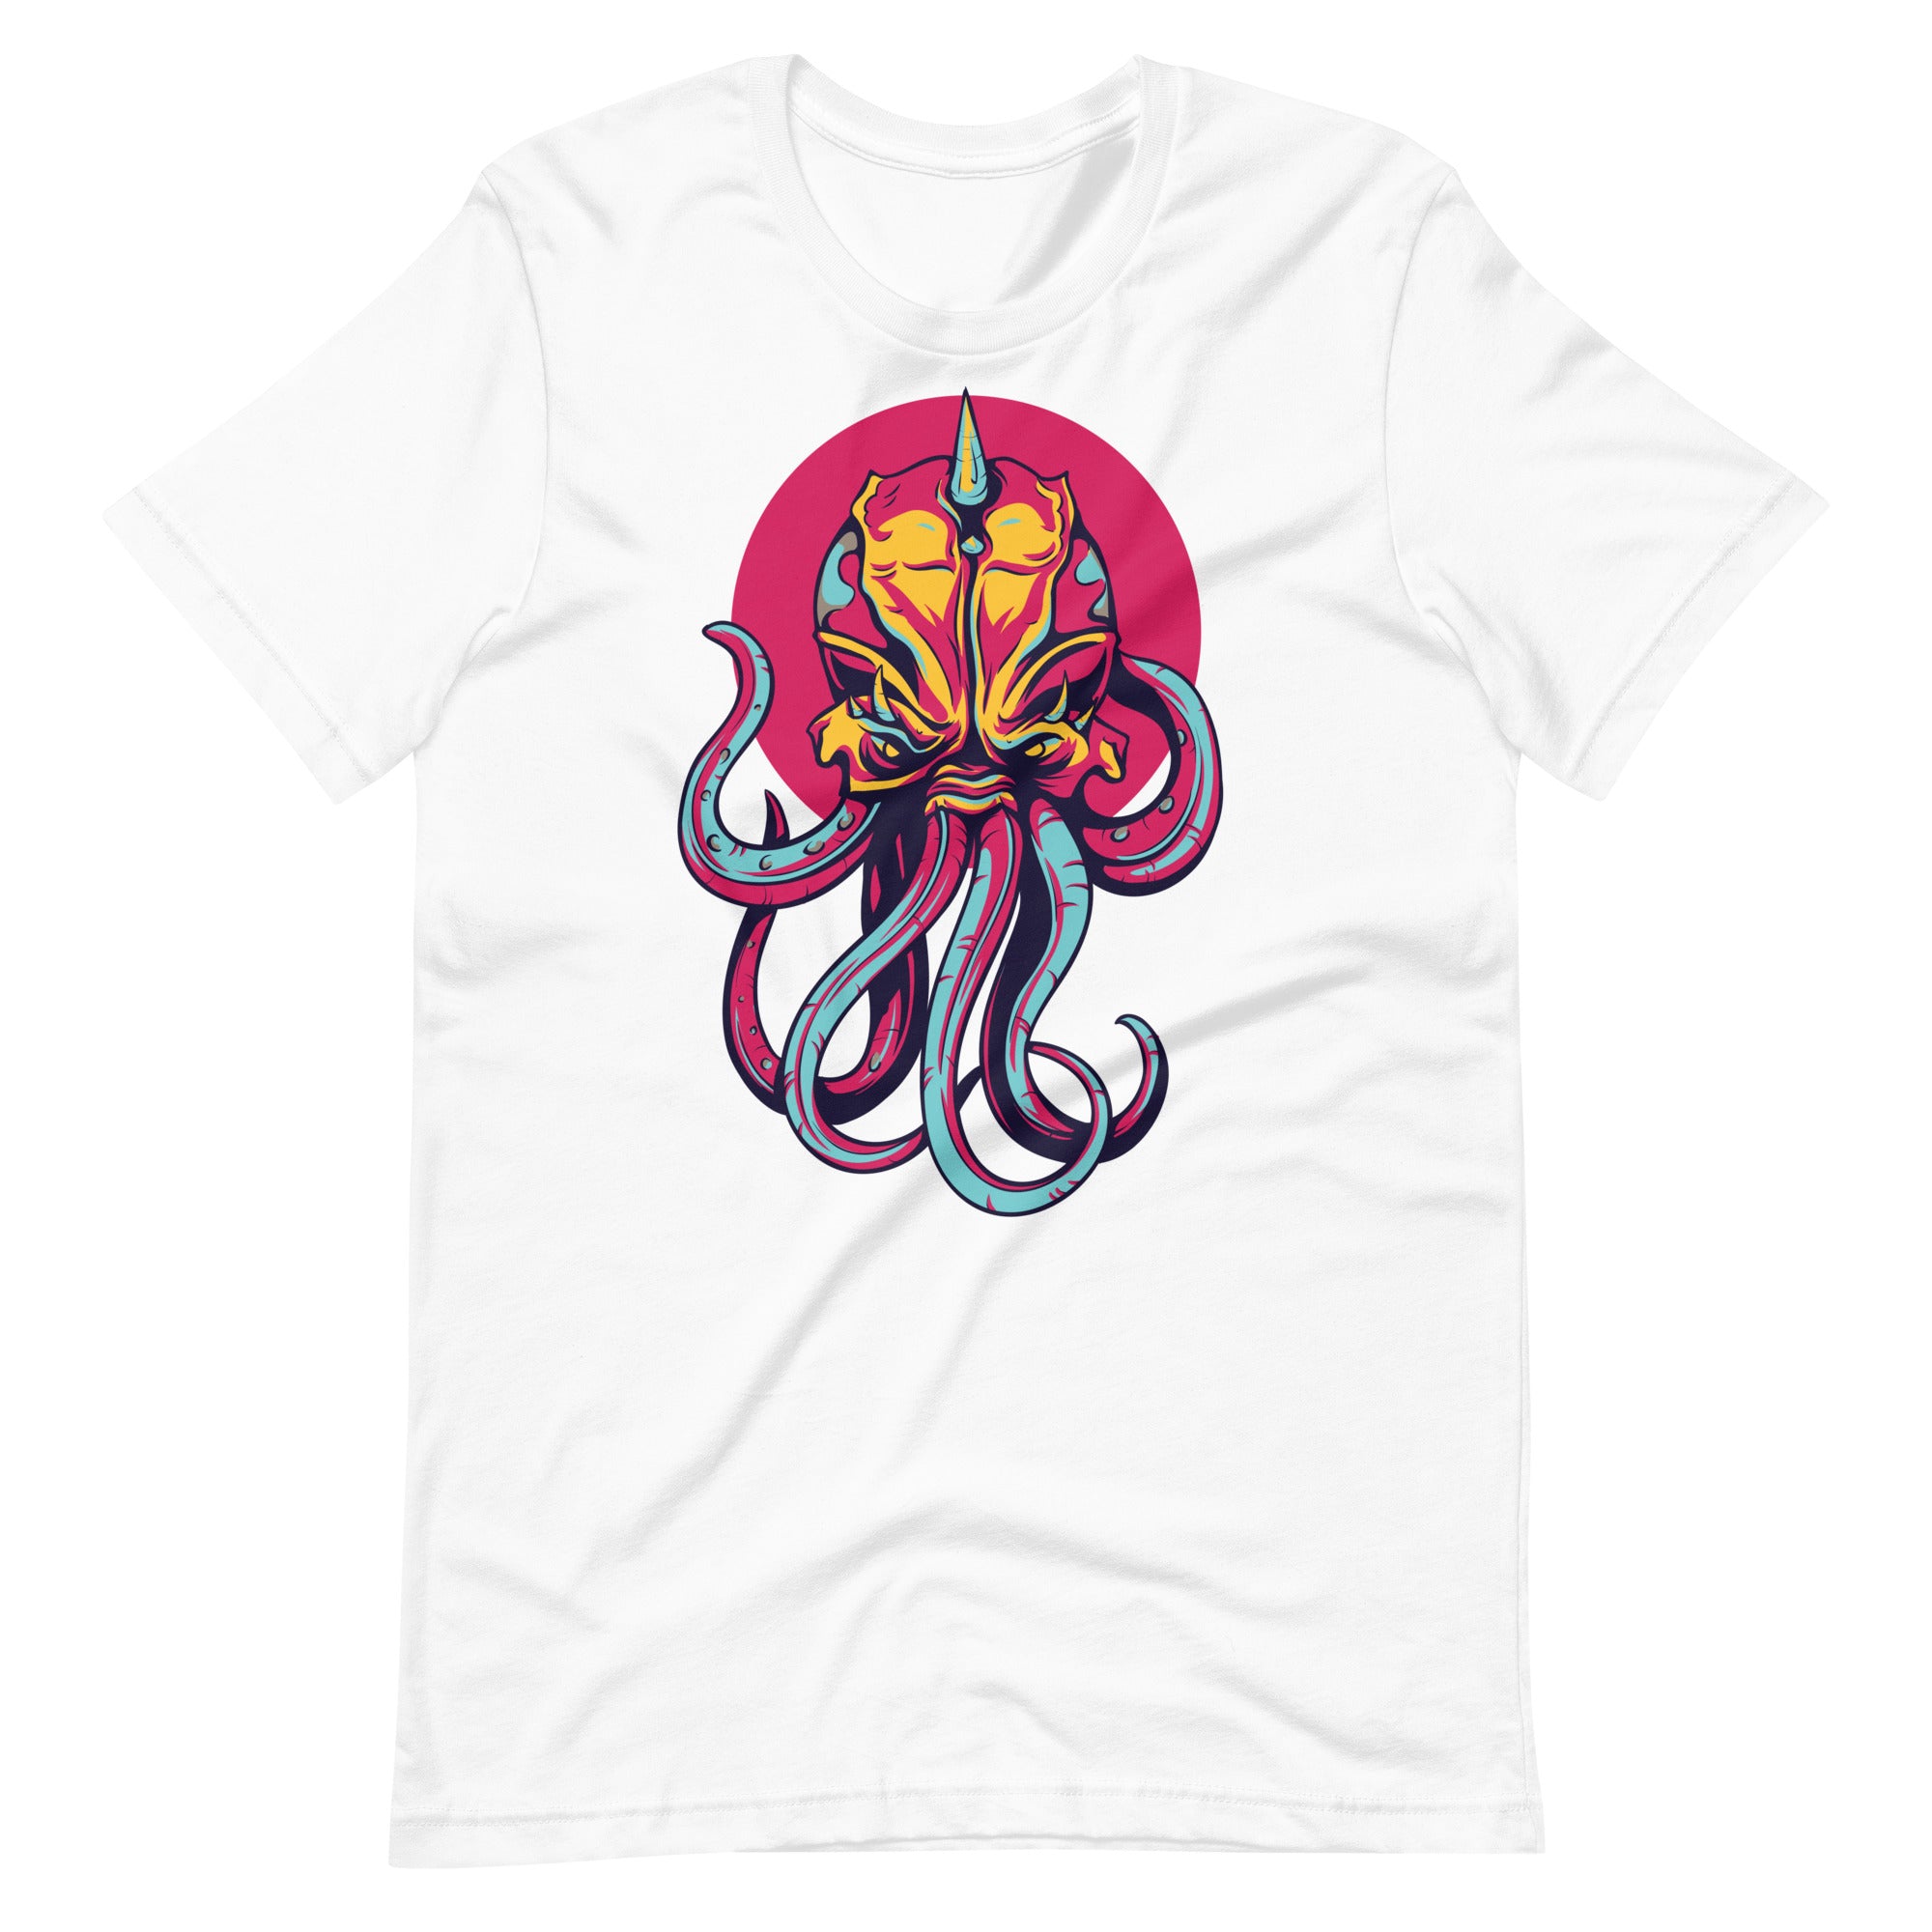 Colorful Powerful Octopus Shirt